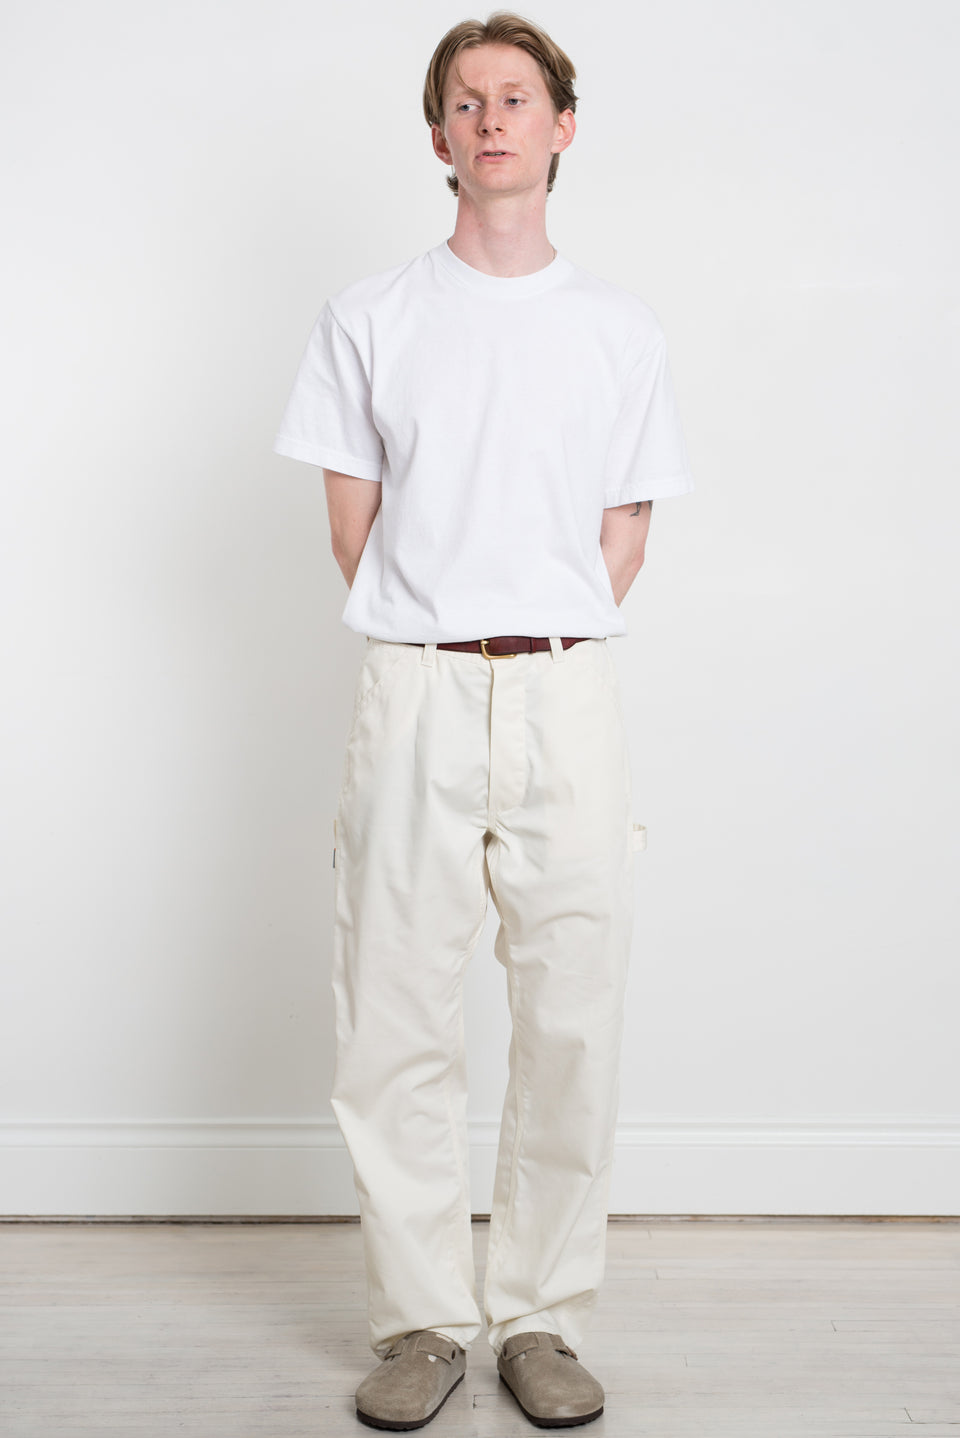 Sassafras SS23 Made in Japan SF-232015 Pruner Pants T/C Chino White Calculus Victoria BC Canada